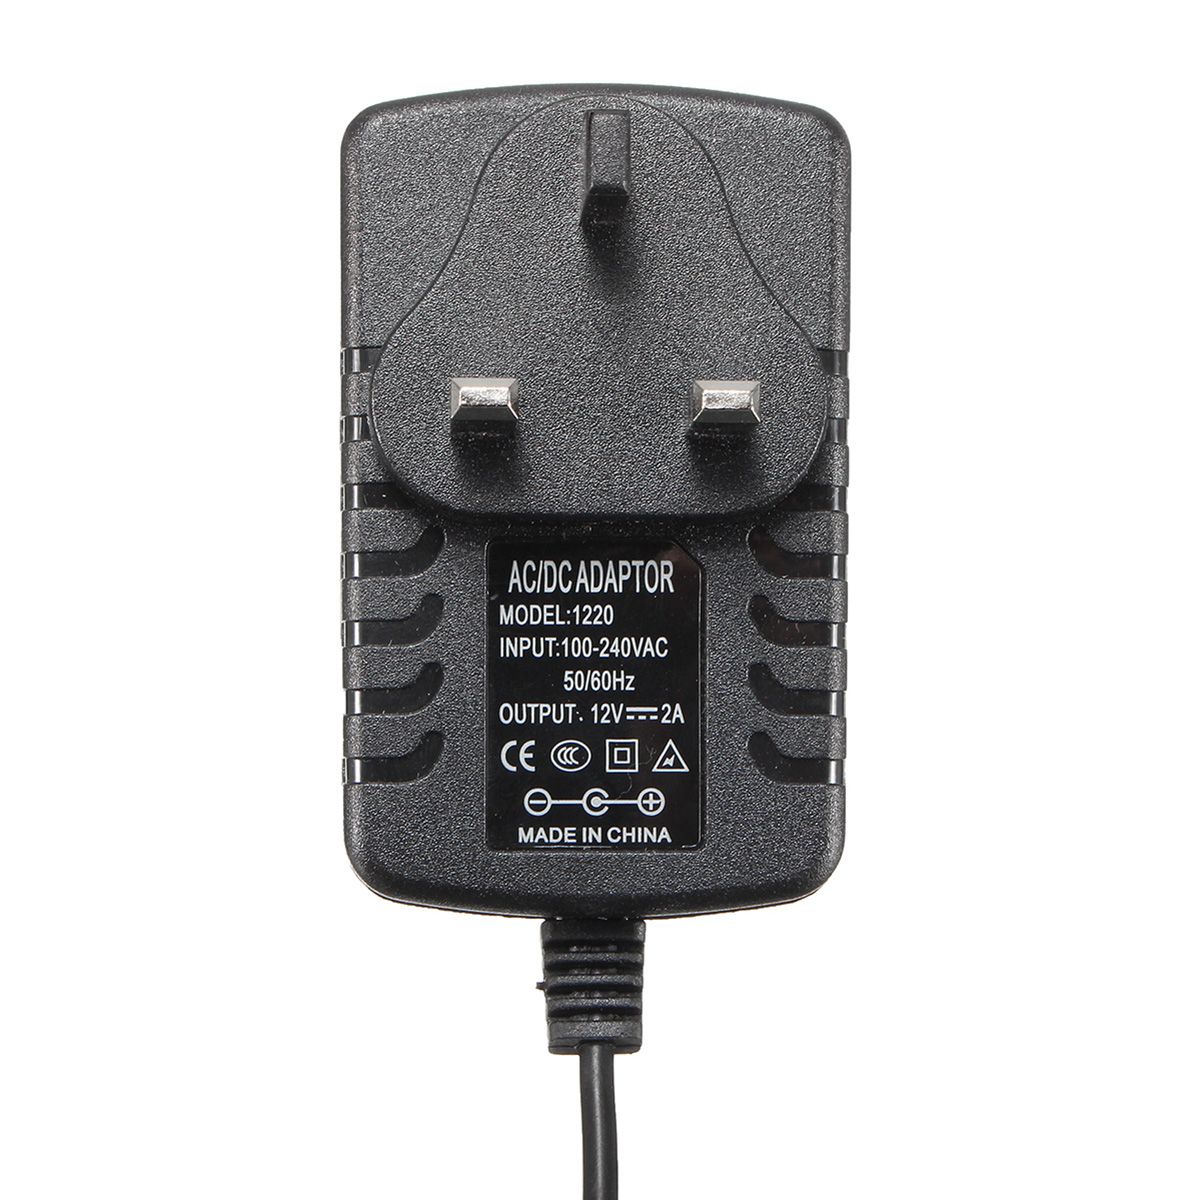 12v-2A-Mains-Power-Supply-Adapter-Charger-for-Bose-SoundLink-Mini-1377384